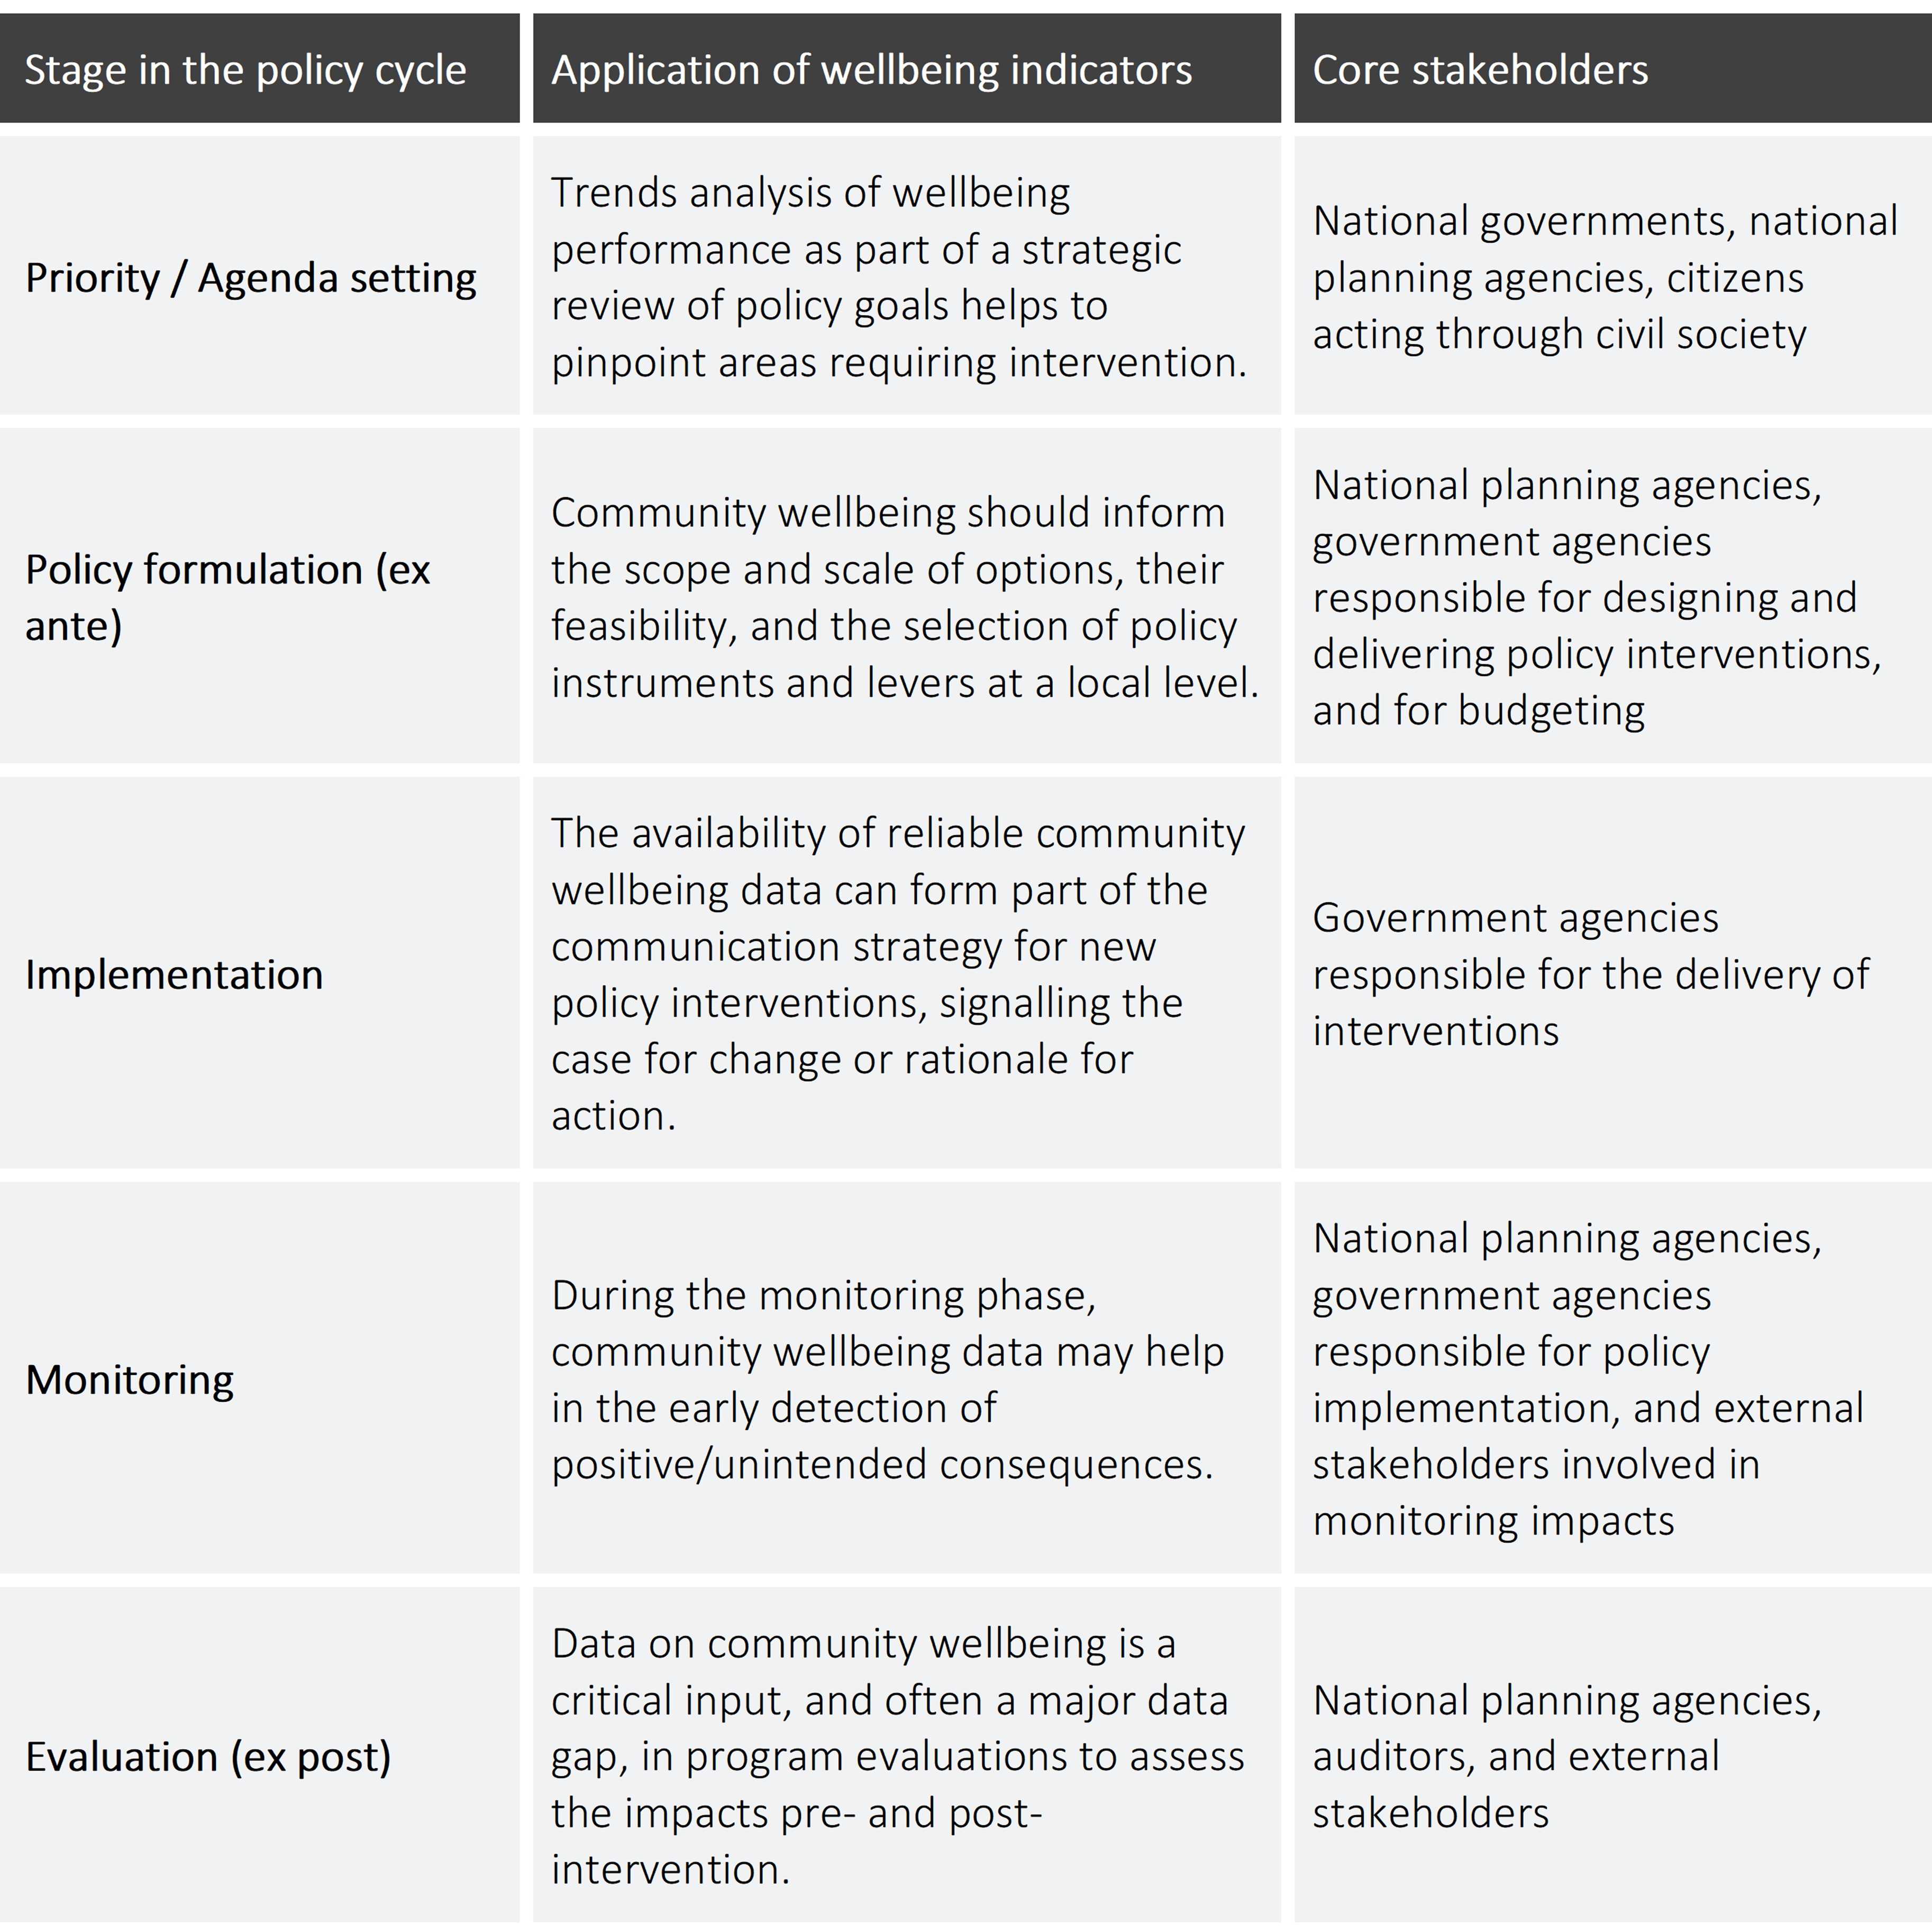 Application of wellbeing indicators across the policy life cycle